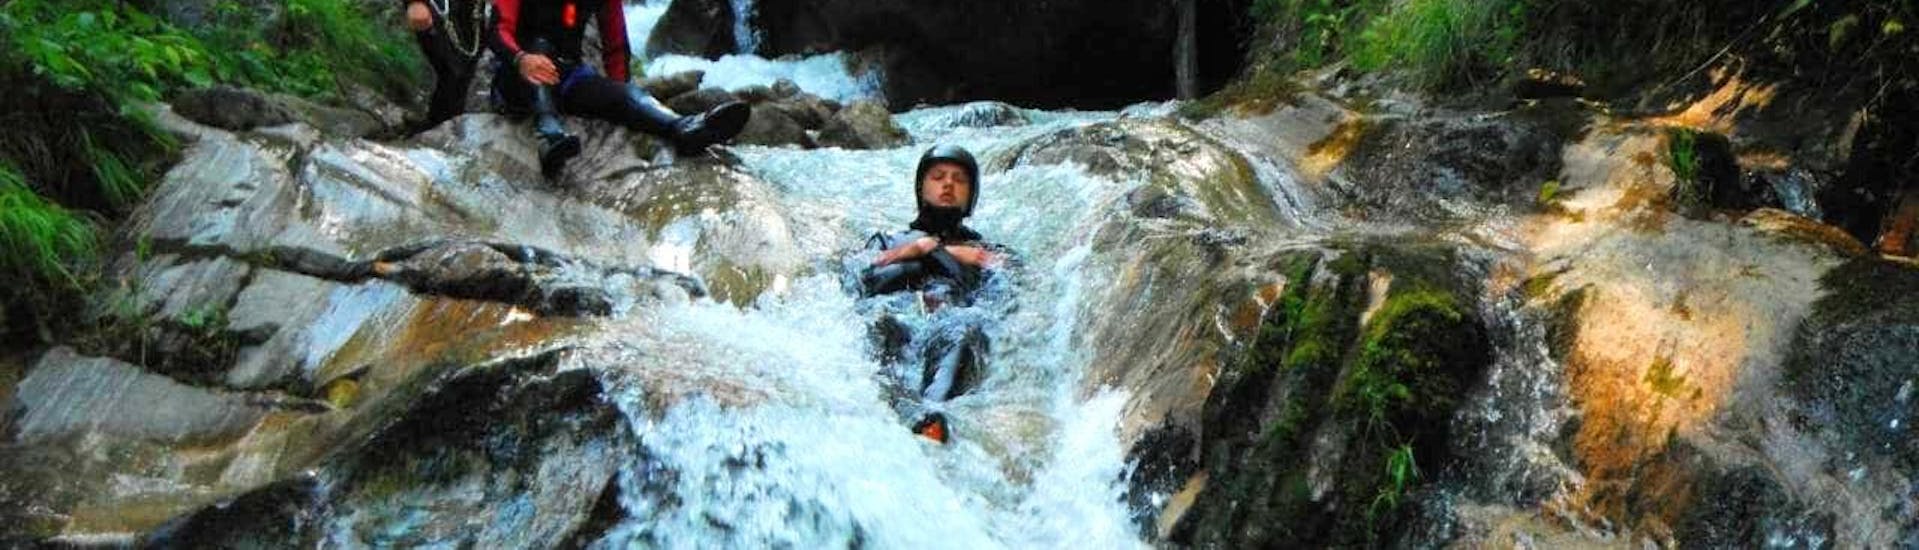 Canyoning facile à Obervellach.